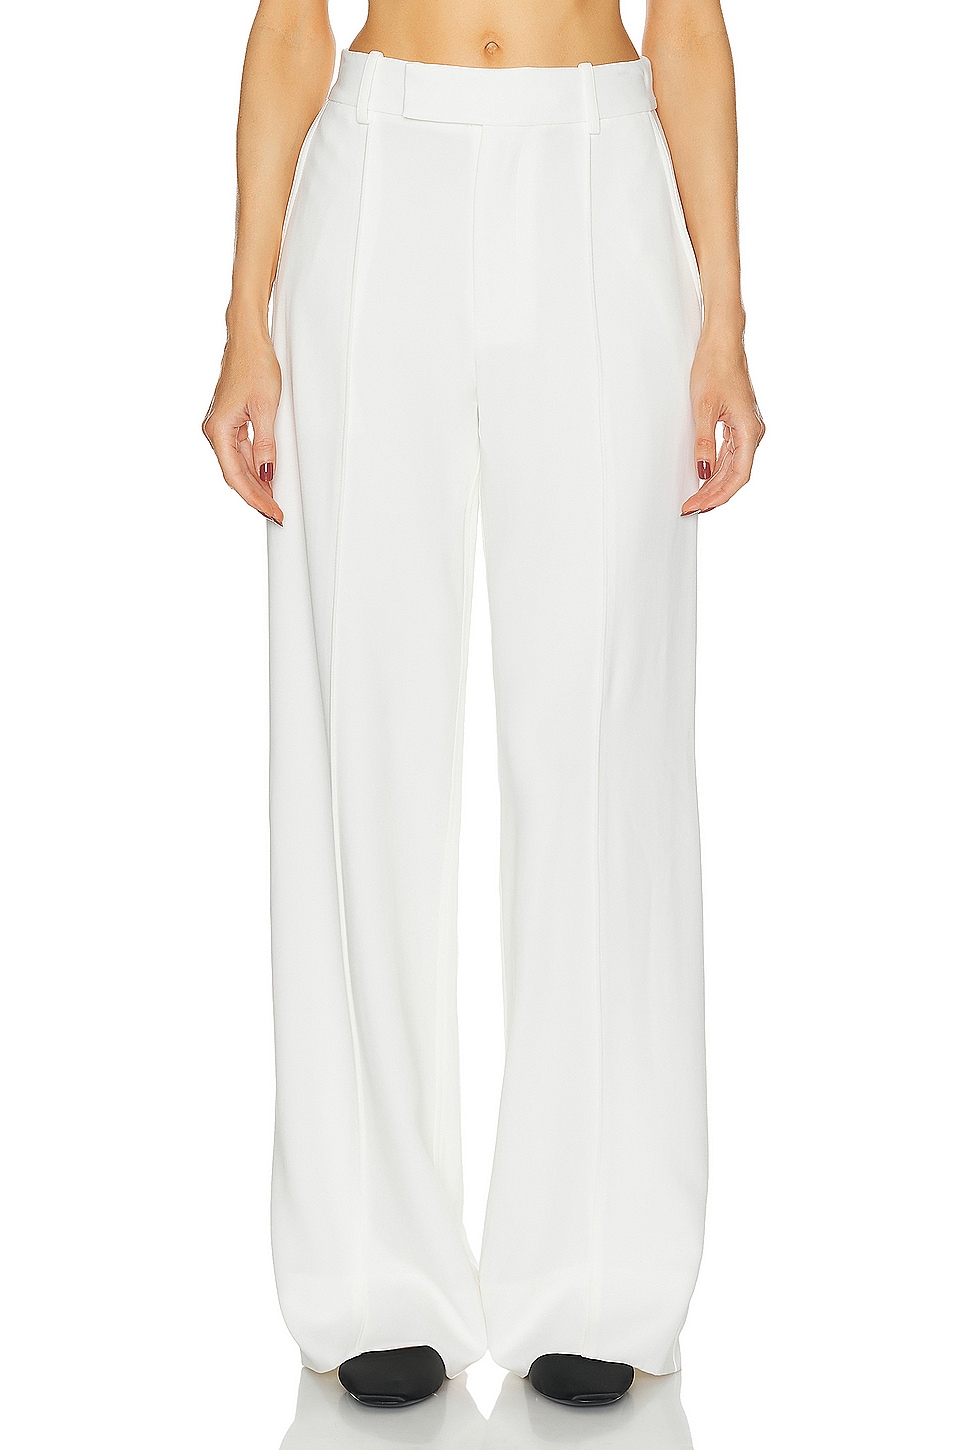 Image 1 of Proenza Schouler Weyes Bootcut Pant in White